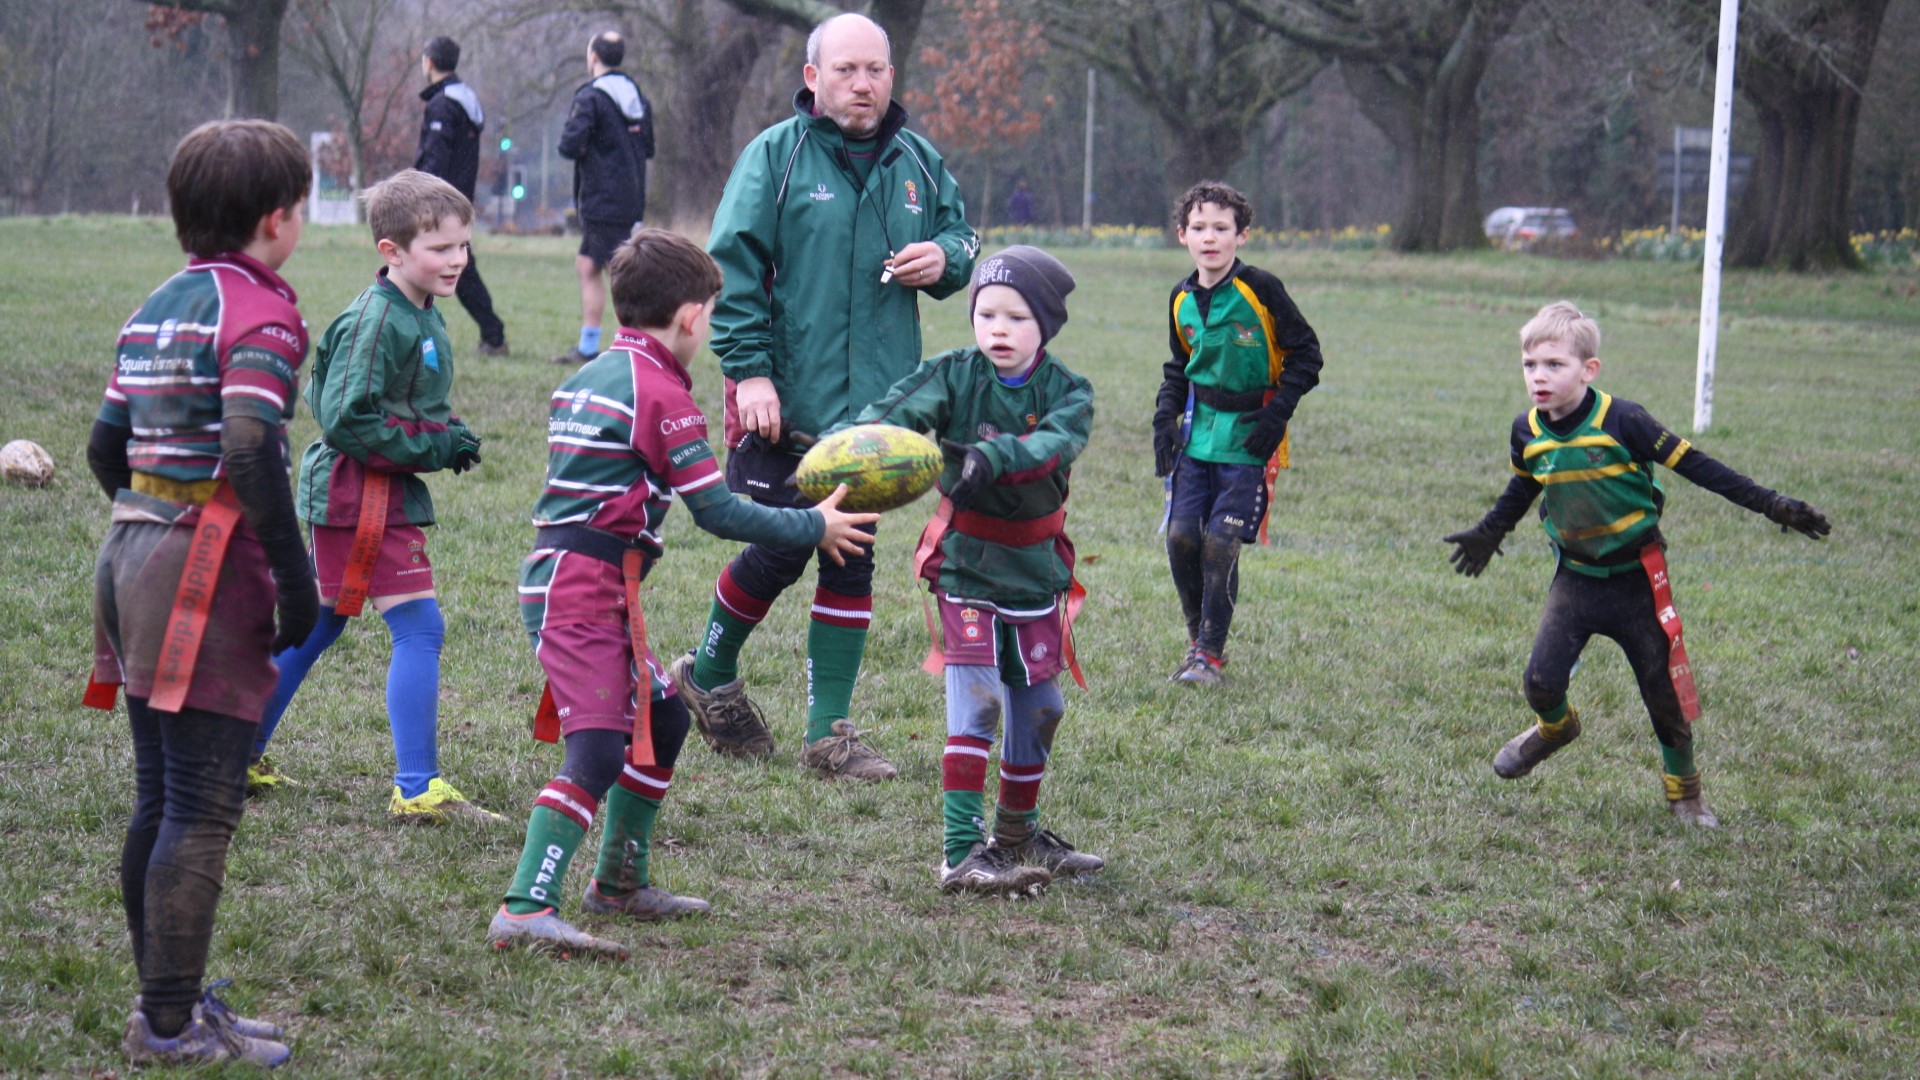 Image of Guildfordians RFC (GRFC) Minis Rugby team located on Stoke Park Guildford - Respect